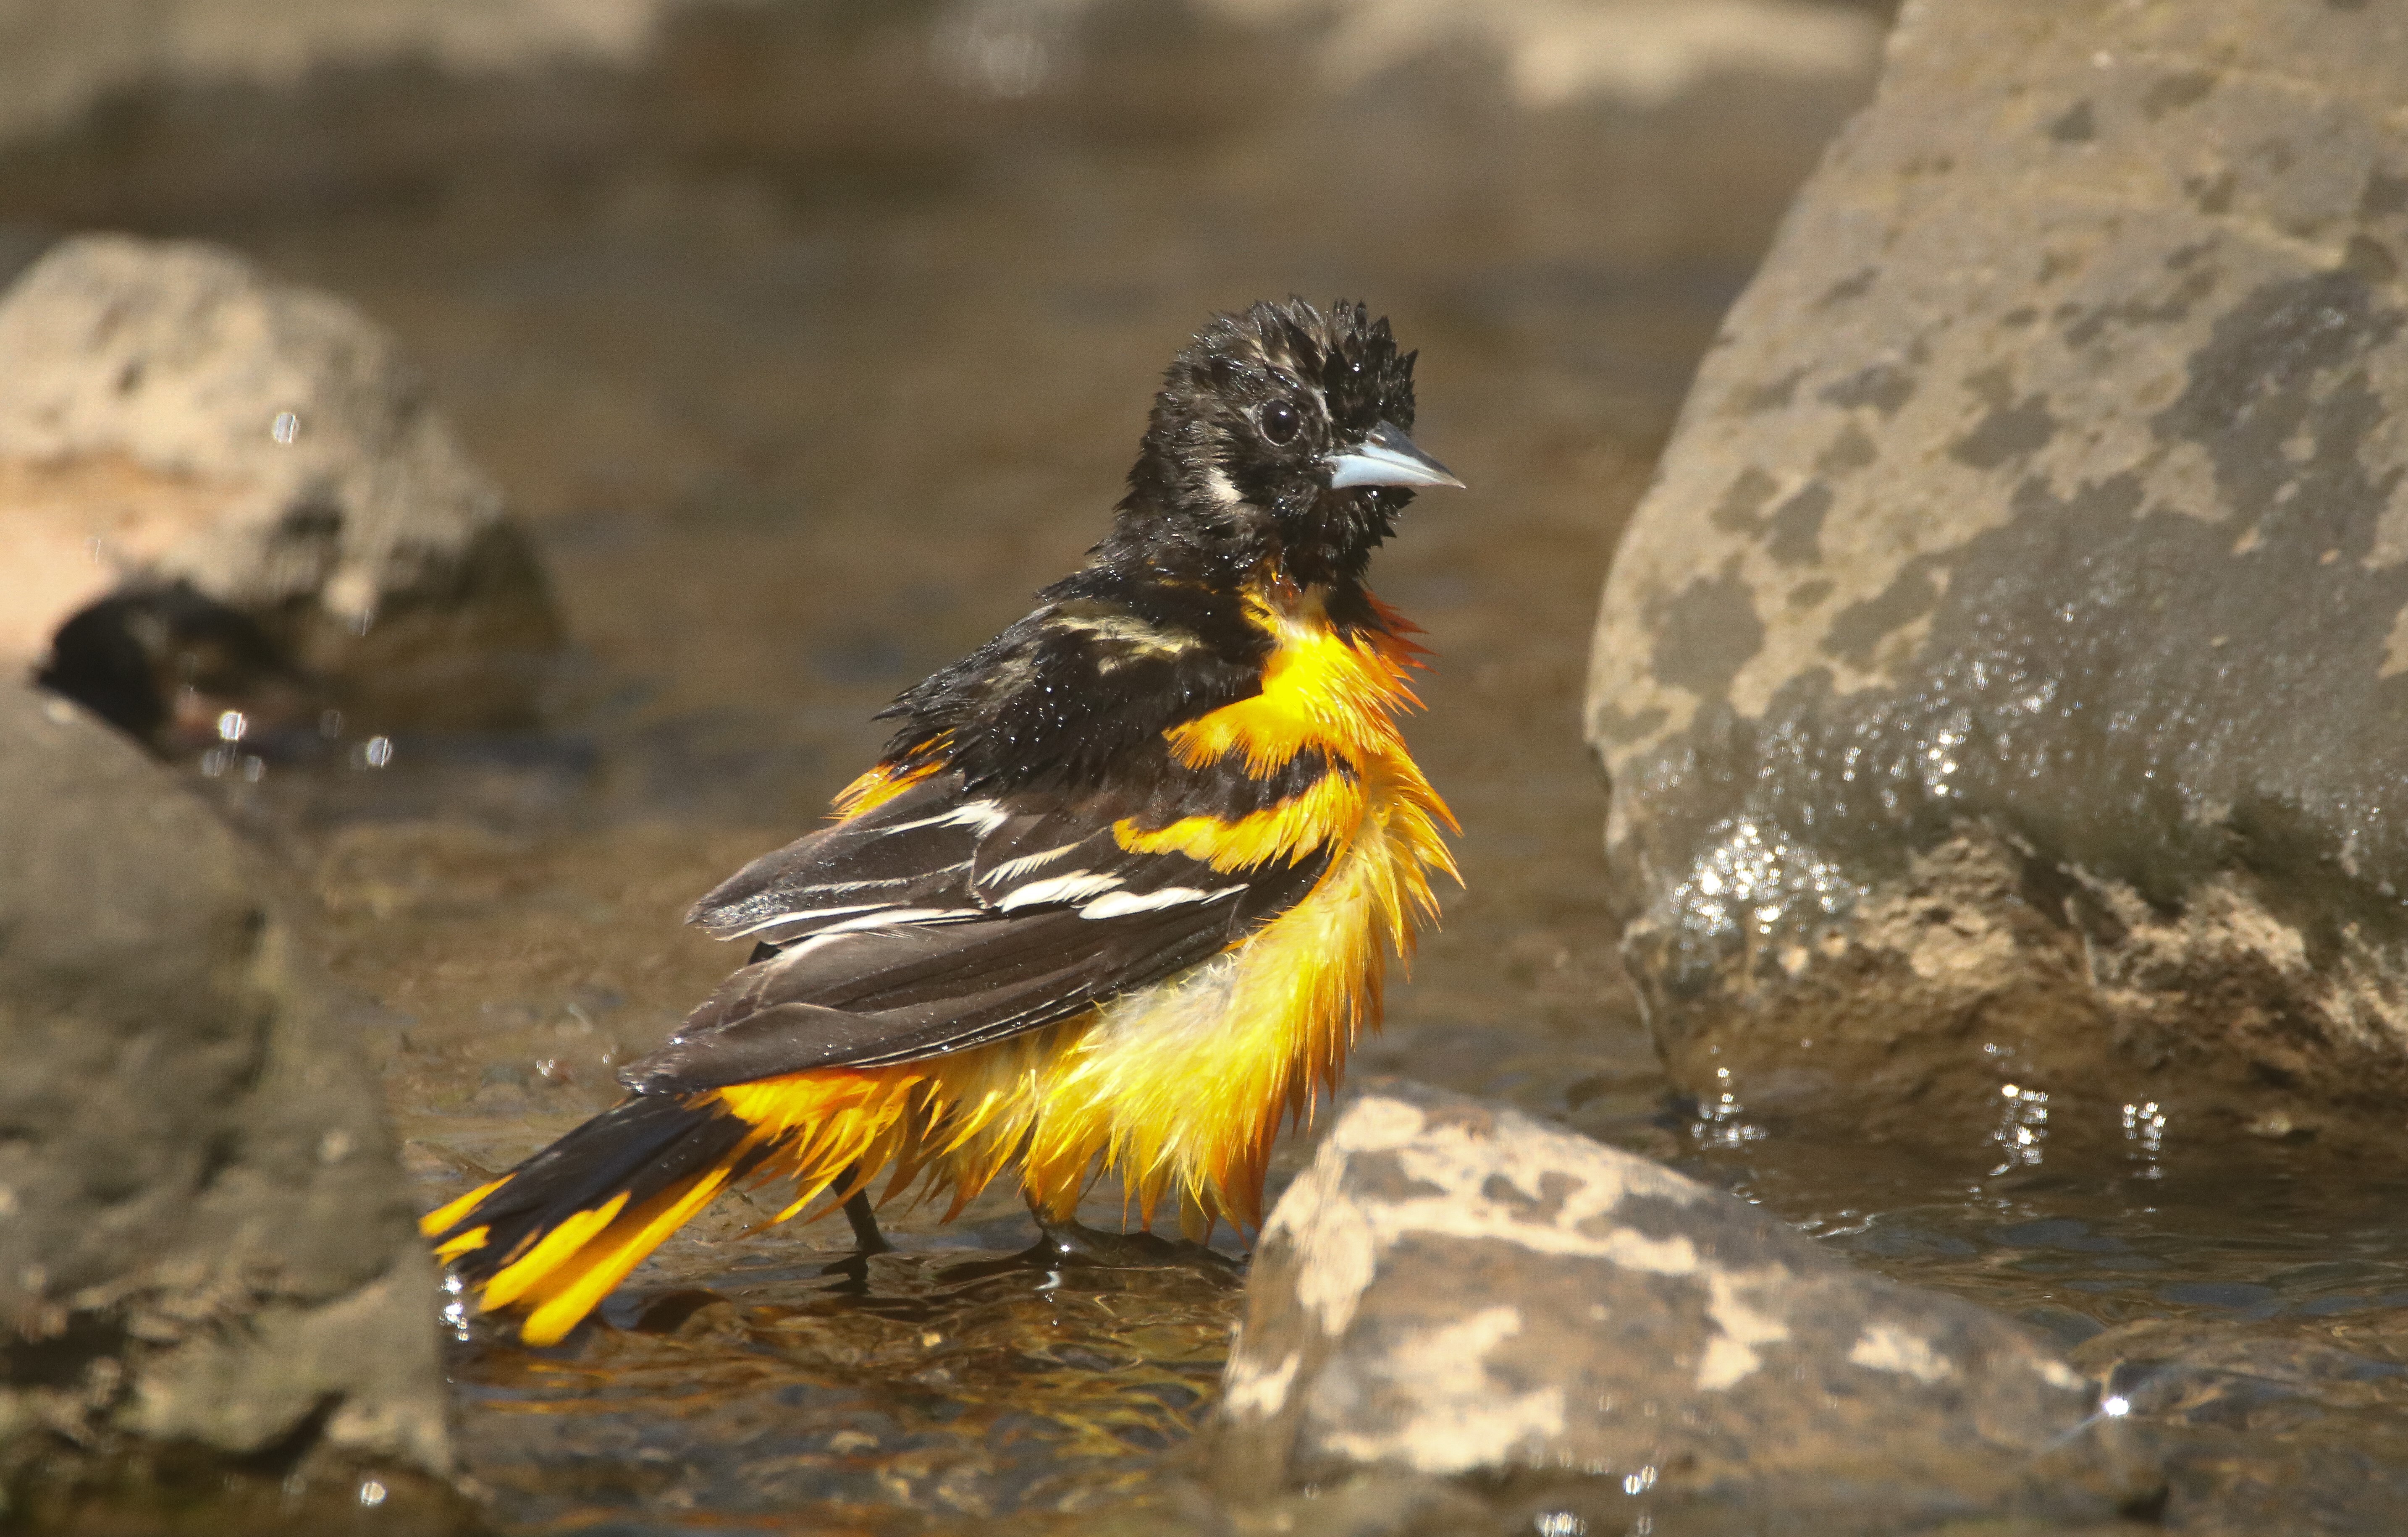 Nesting birds like the Baltimore Oriole may come for a dip at Clove Lakes Park. Photo: Dave Ostapiuk